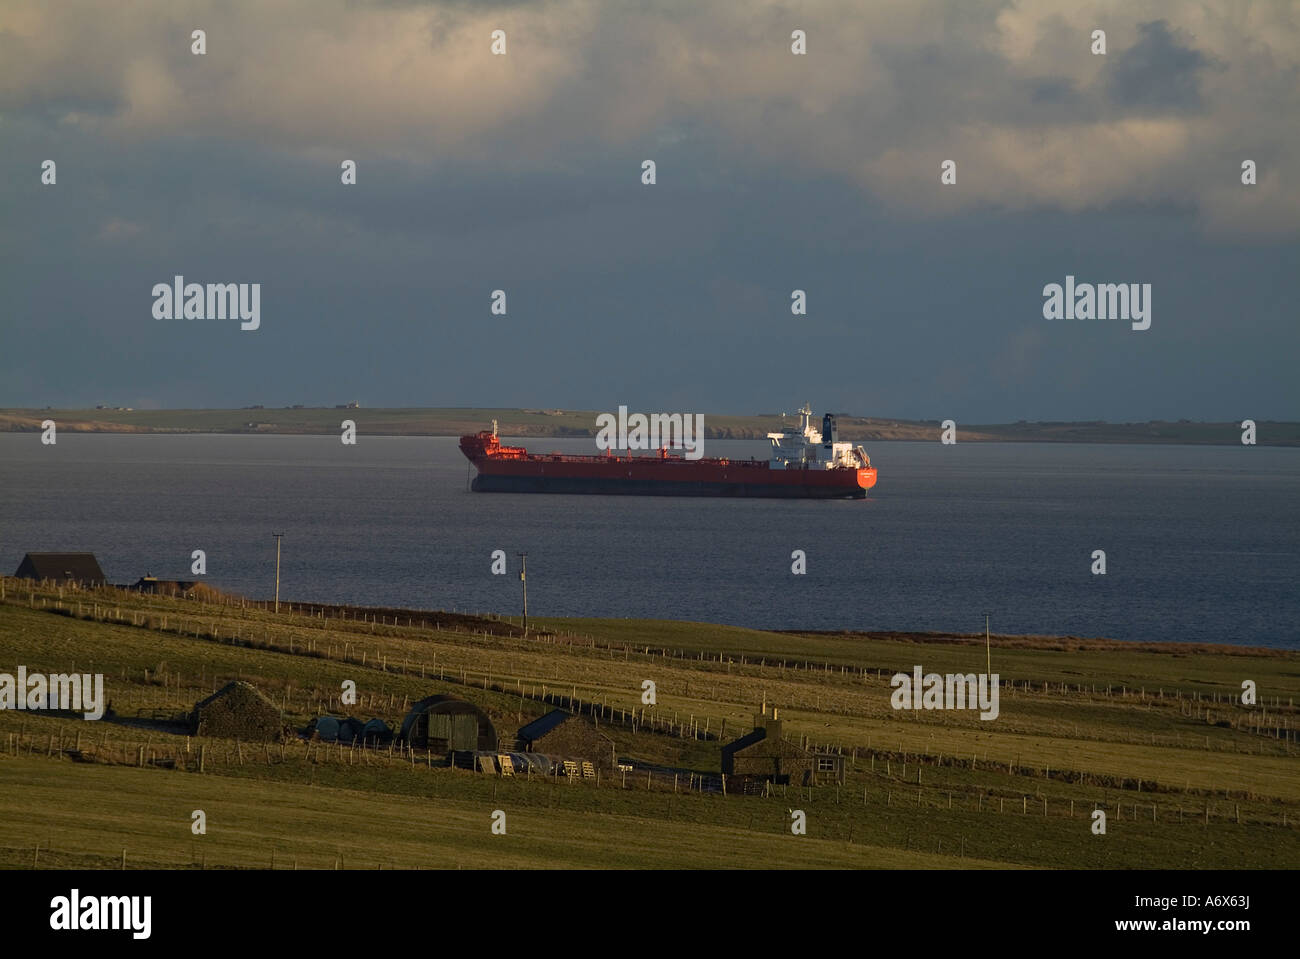 dh Oil tanker SHIPPING UK Oiltanker anchorage awaiting oil transfer in Scapa Flow and cottage Stock Photo